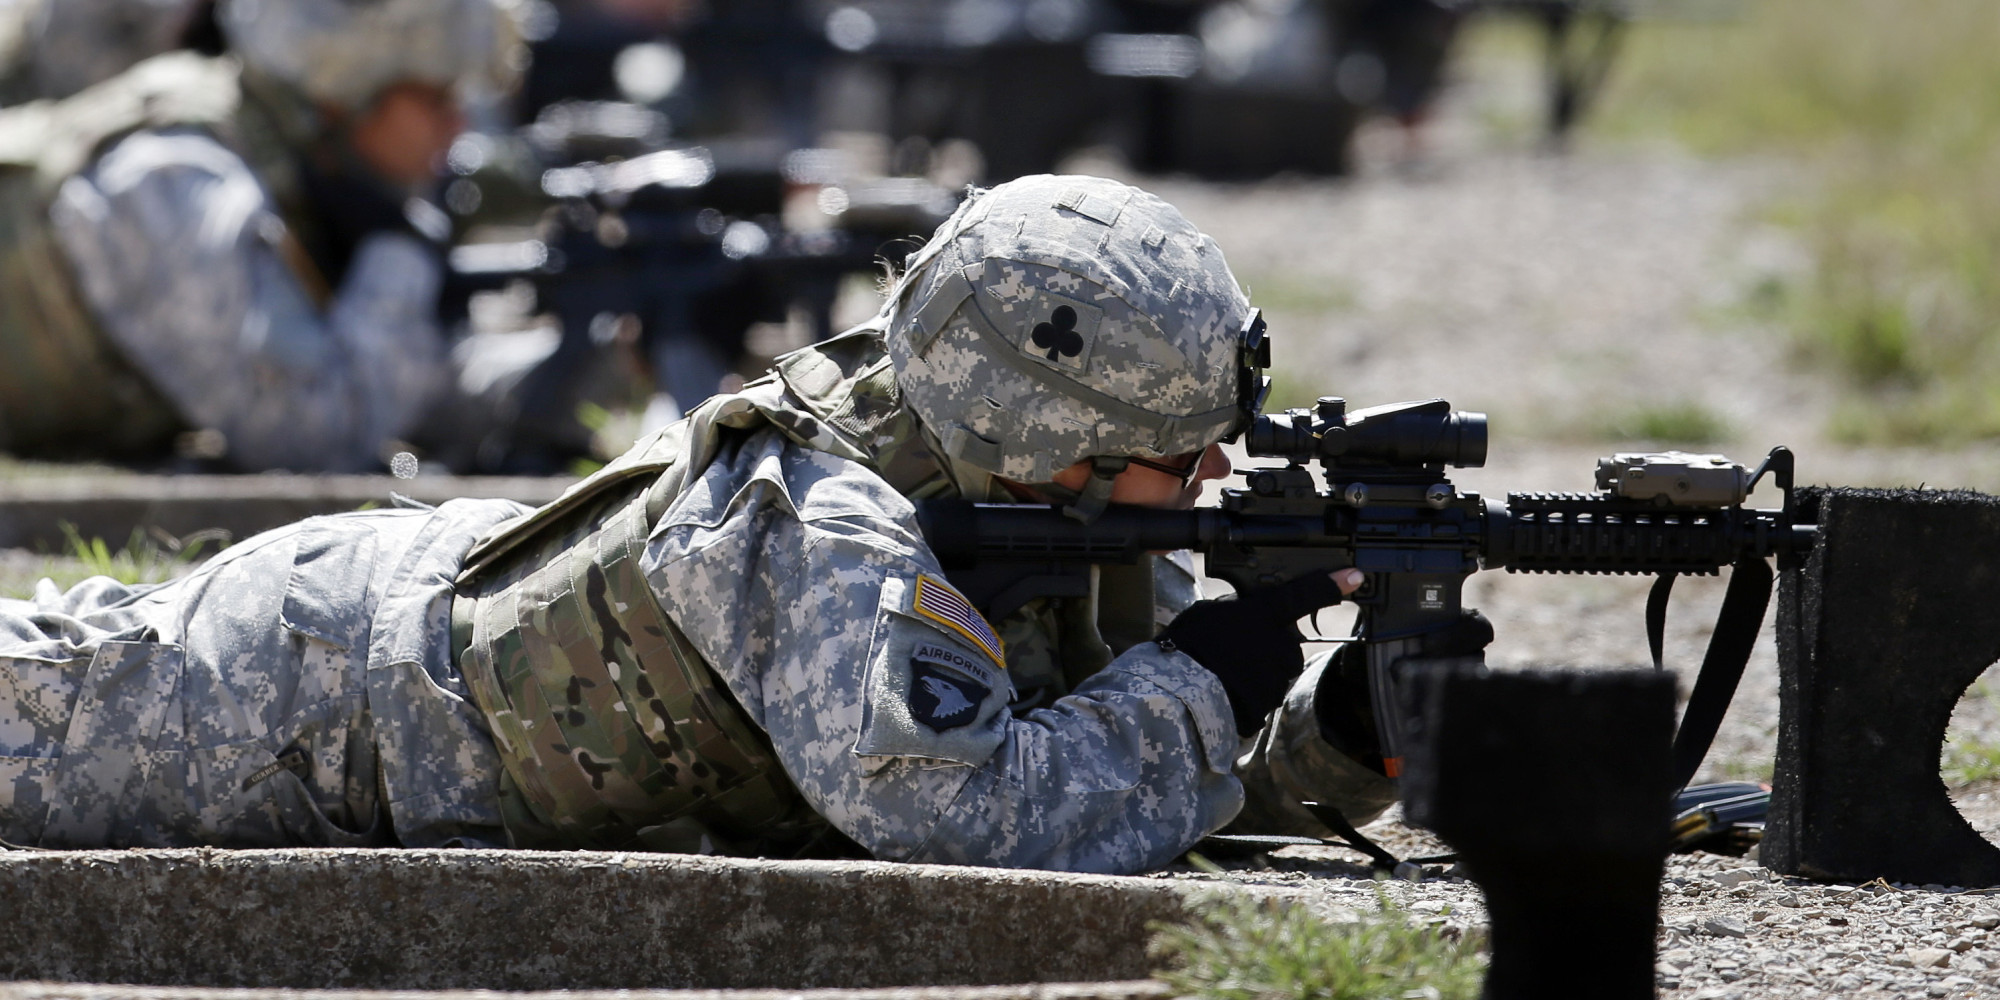 Transgender Women Could Fight In Combat As They Have The 'Physical ...